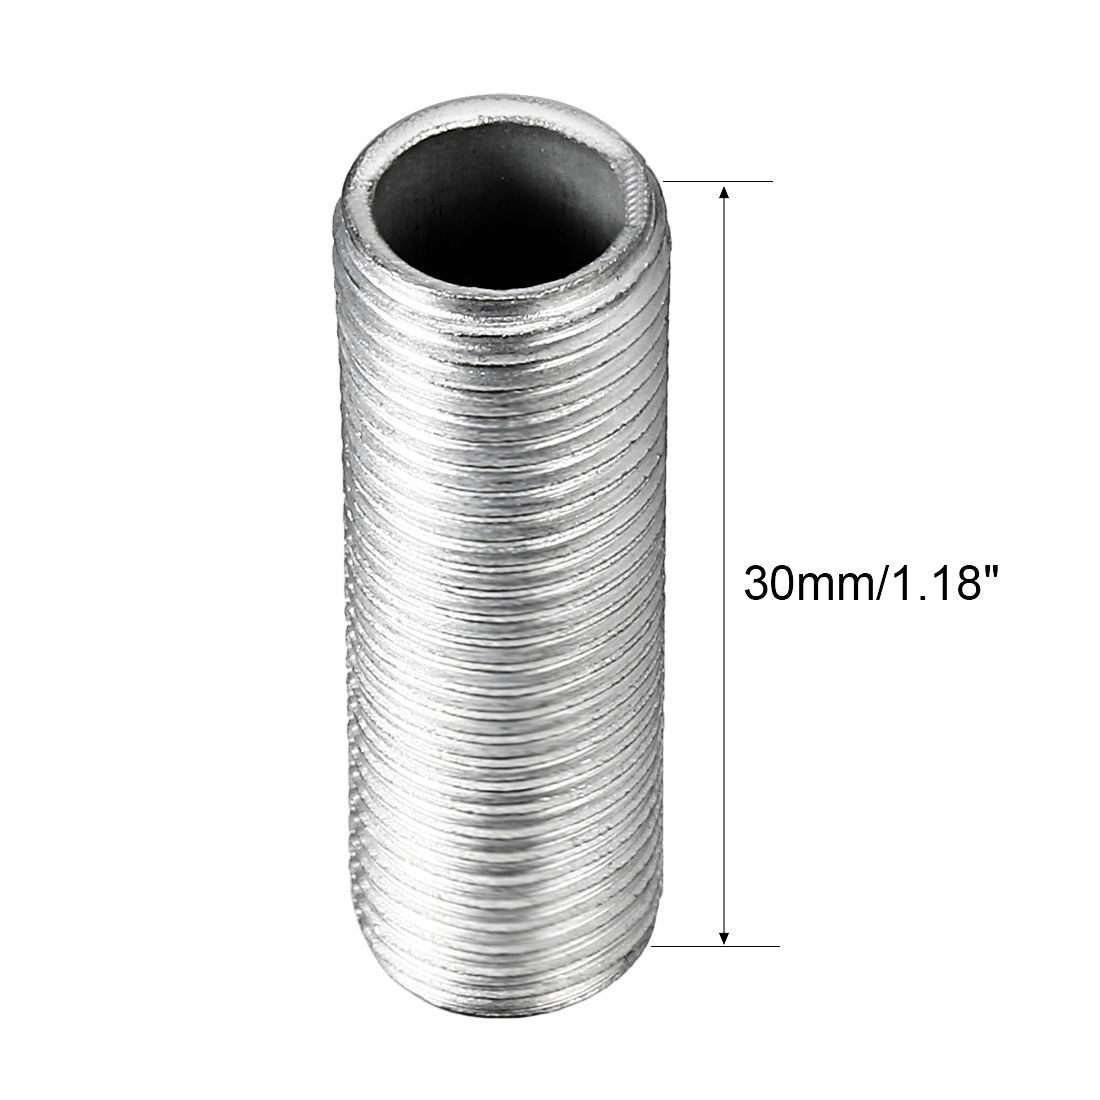 uxcell Uxcell Zinc Plated Lamp Pipe Nipple M10 30mm Length 1mm Pitch All Threaded 10Pcs